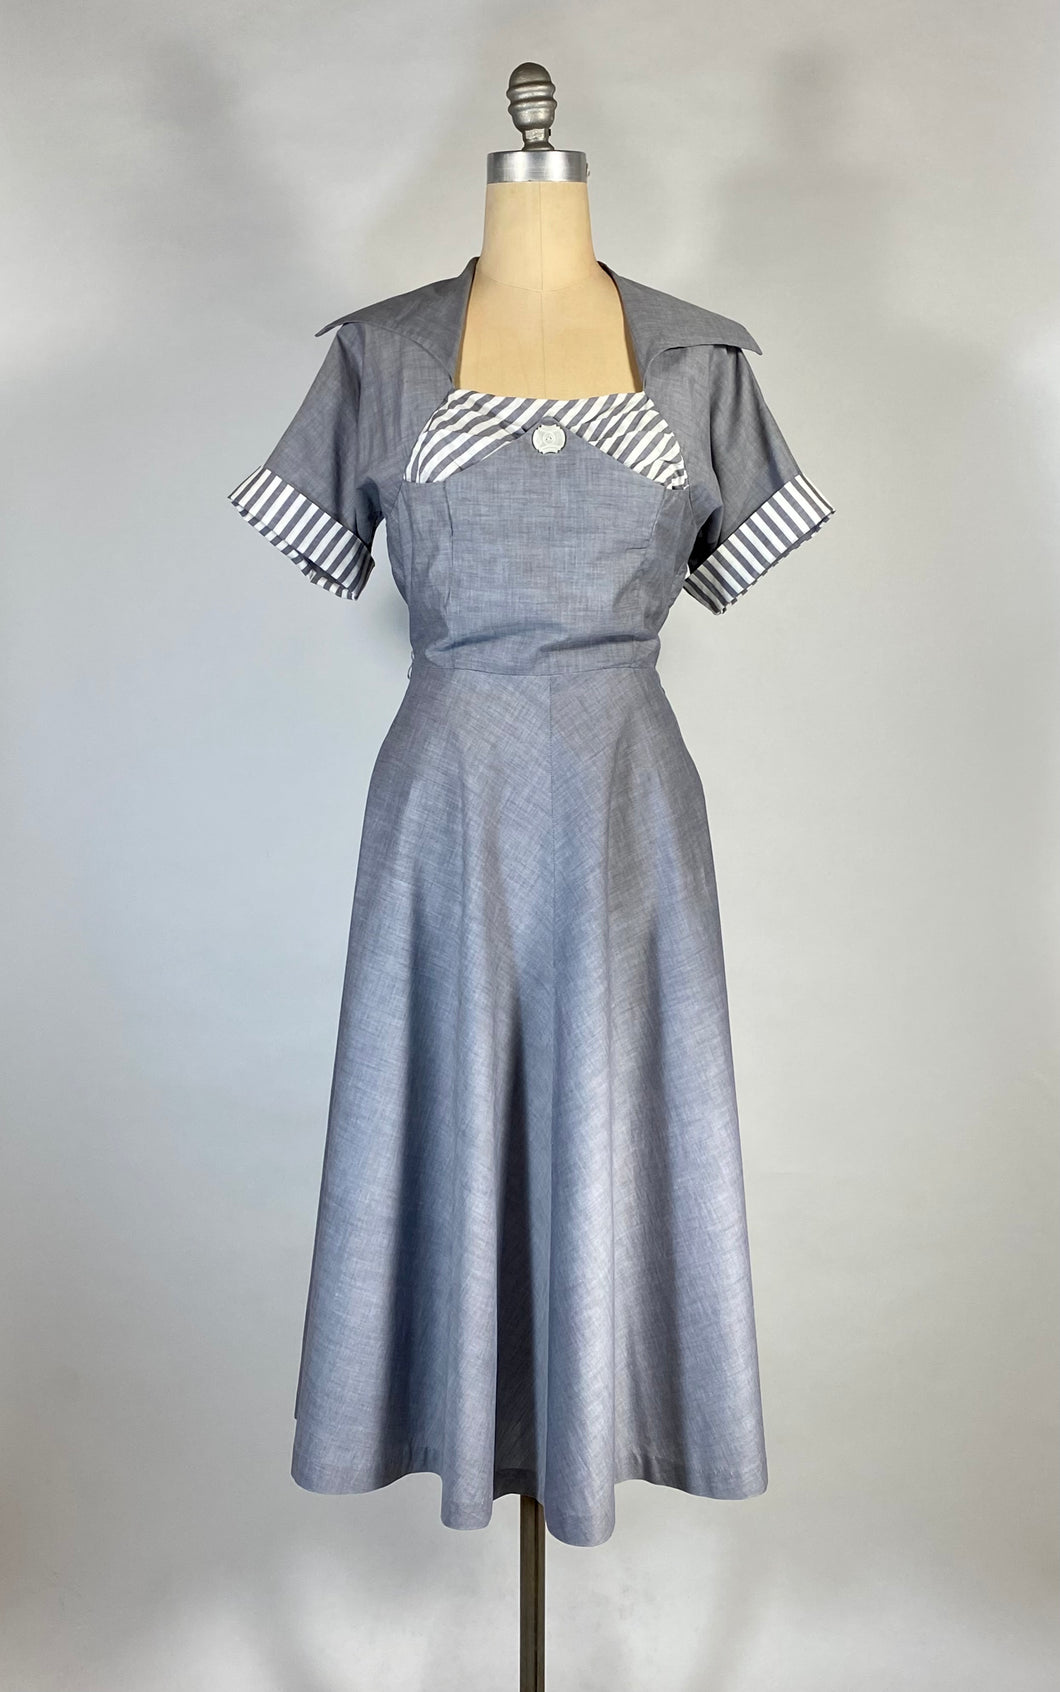 1950's light grey iridescent cotton frock day dress by POLLY BRIEF size Medium